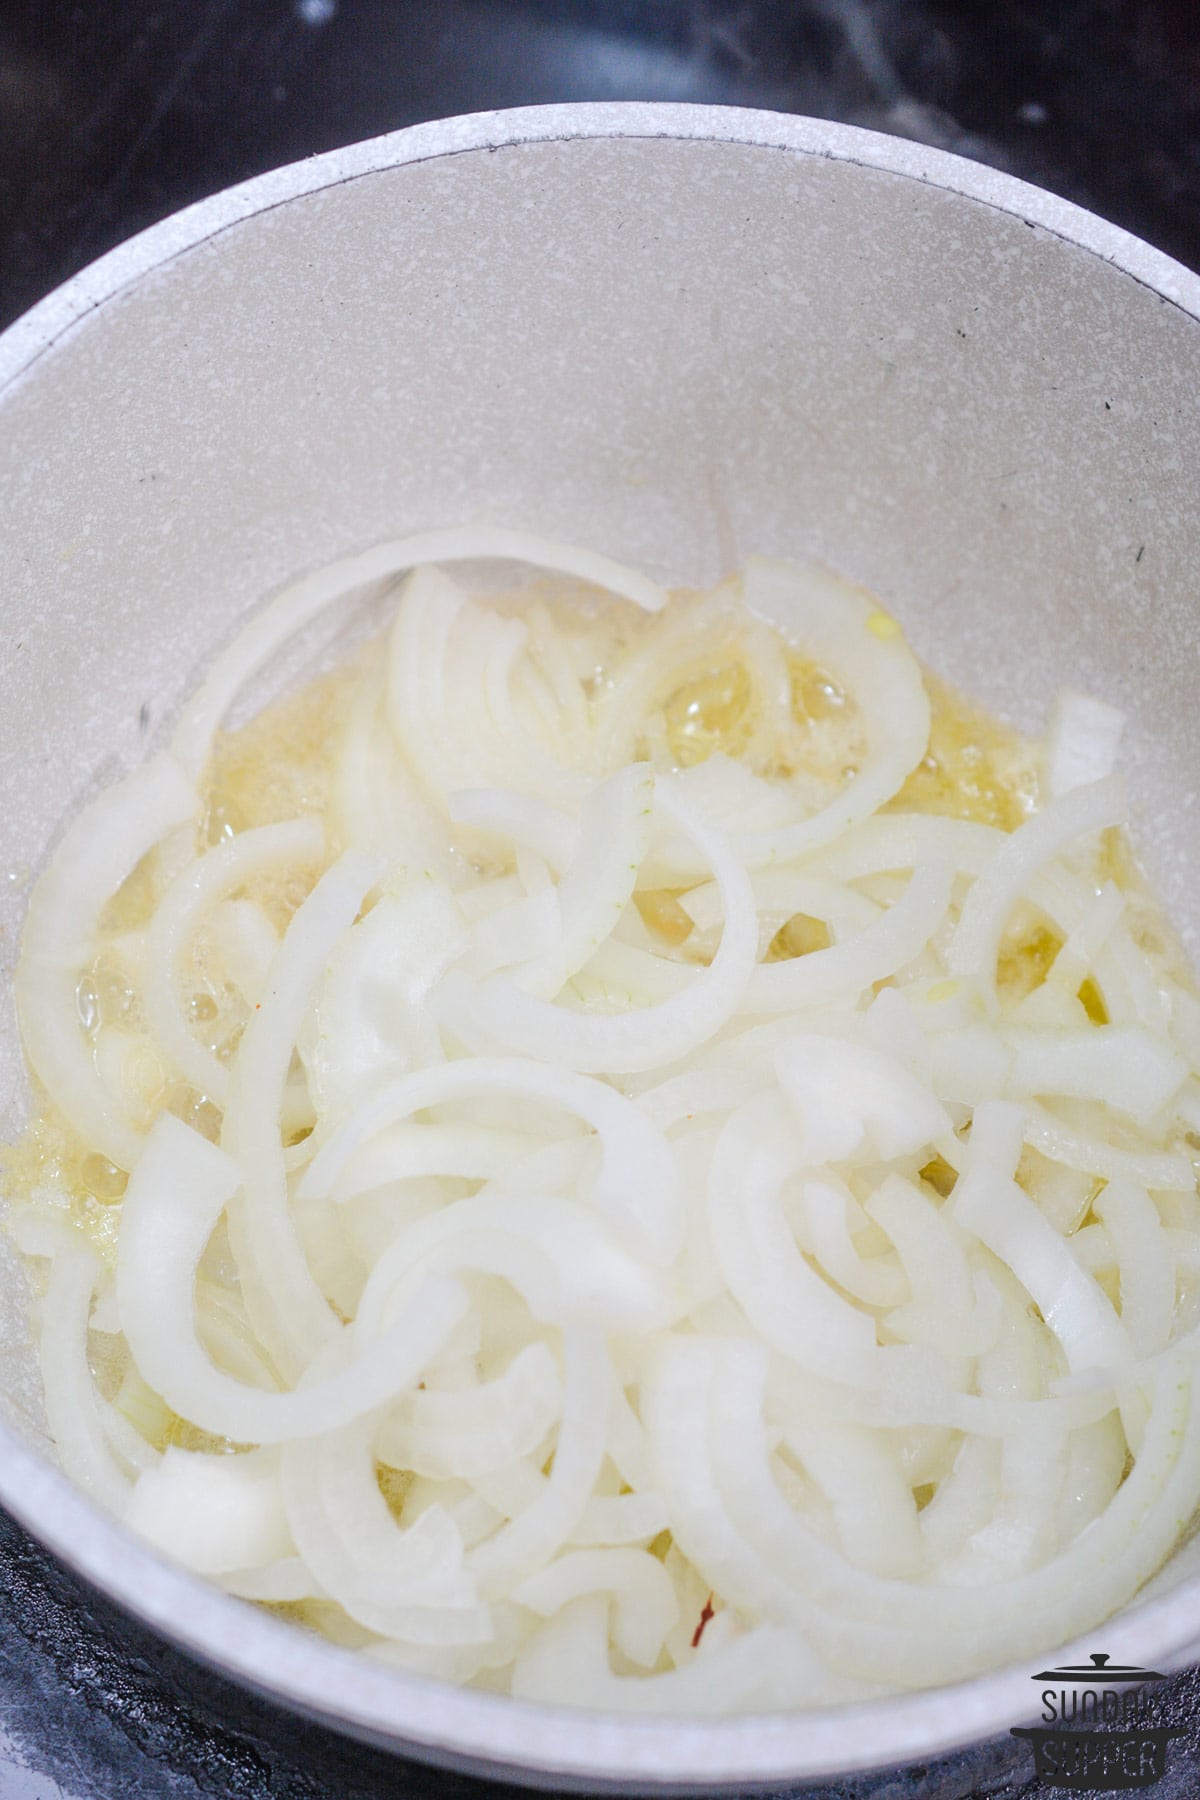 Onions added to the pot of melted butter